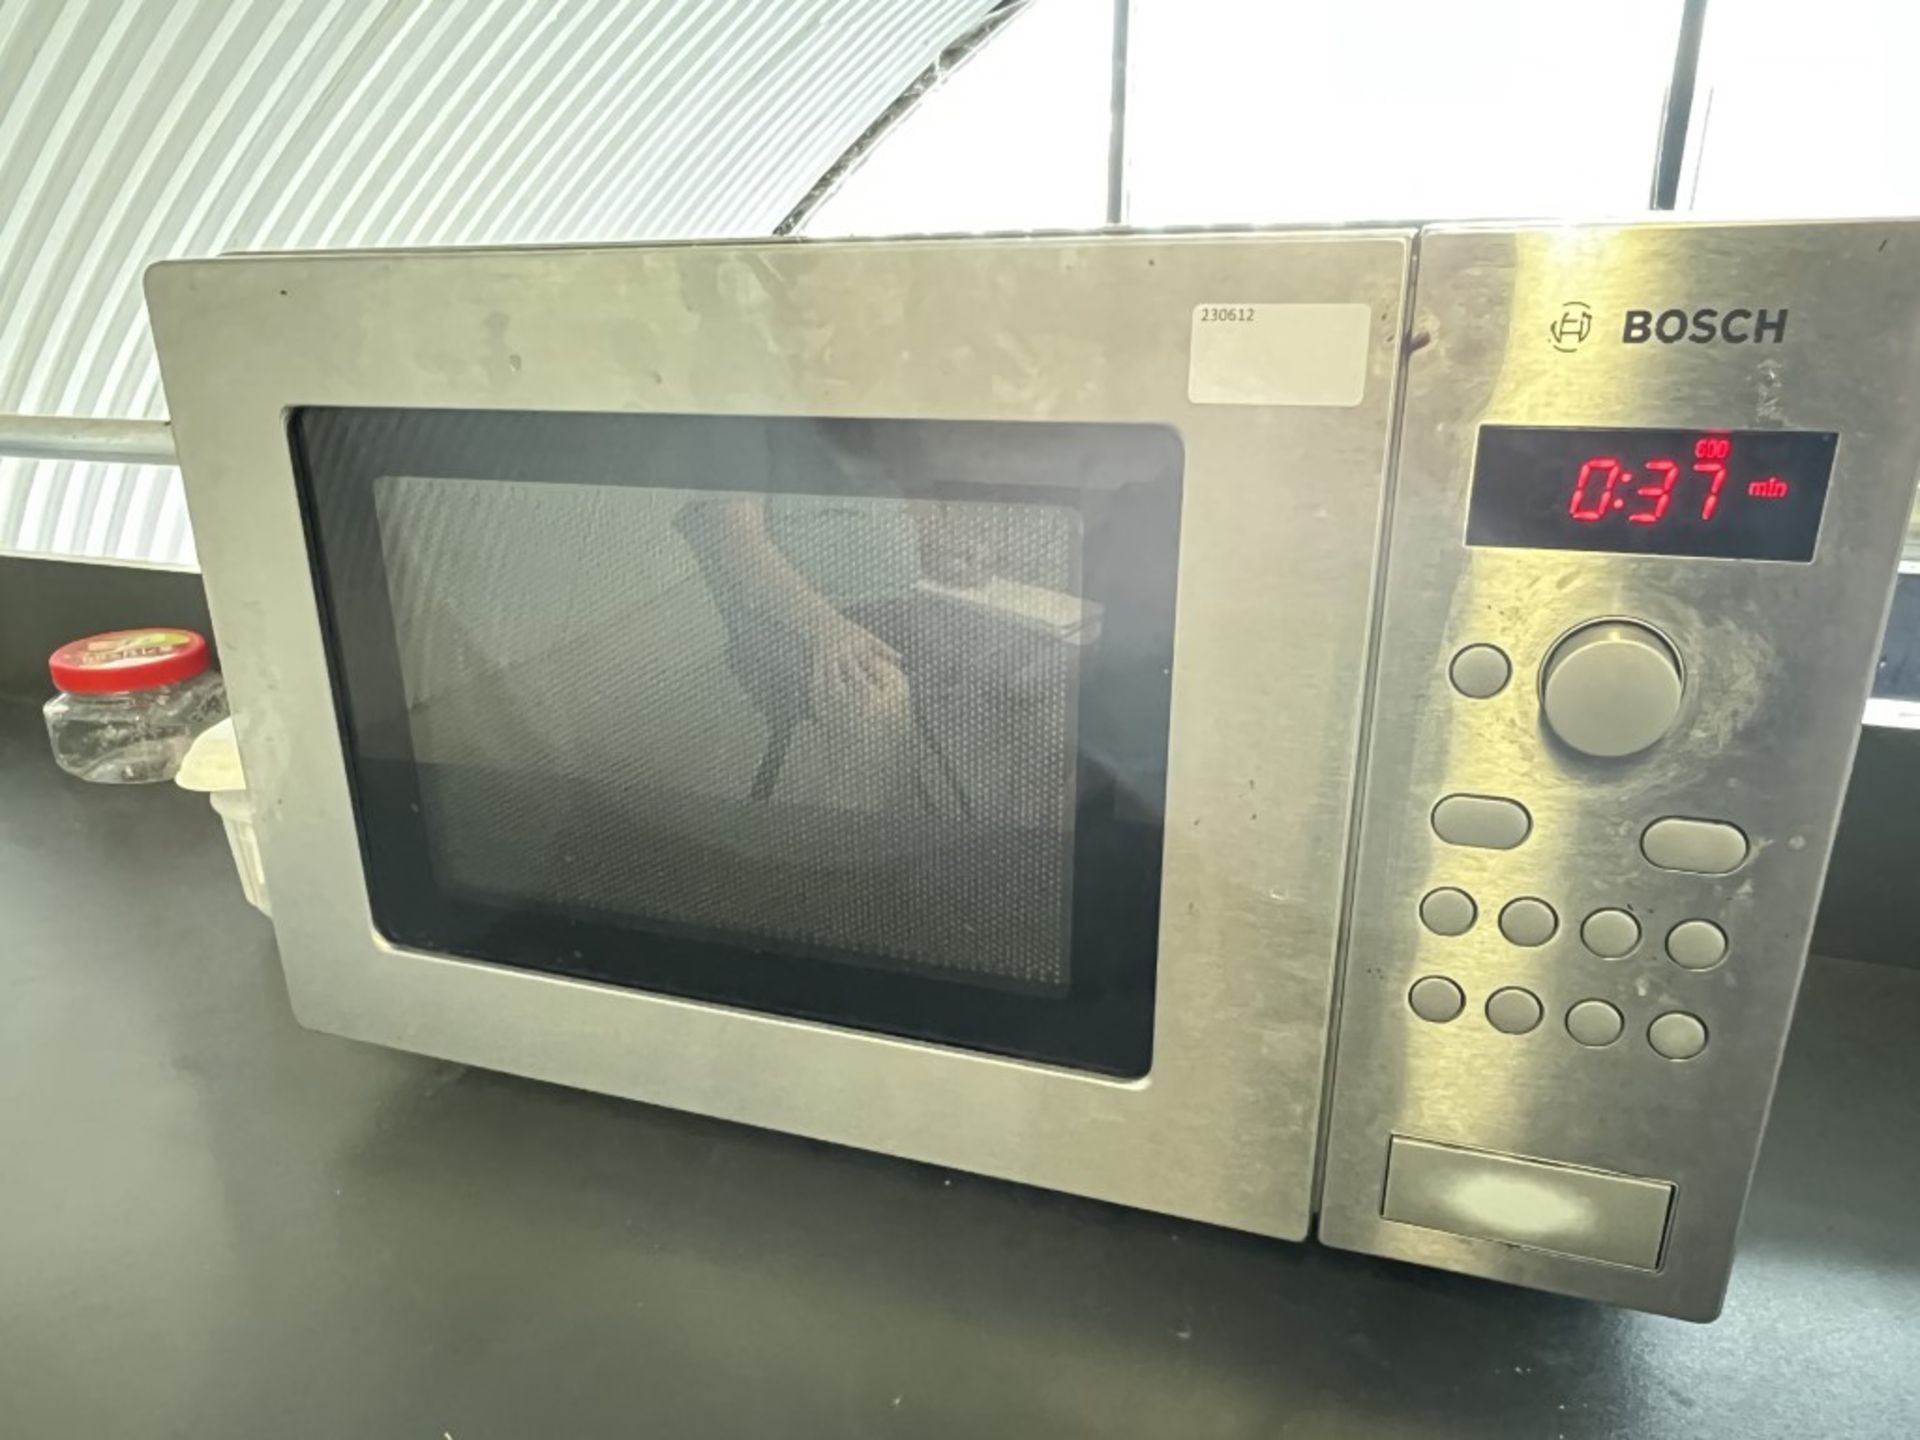 3x Bosch Microwave Ovens (Used) and 2x Bosch Fridges (Used)